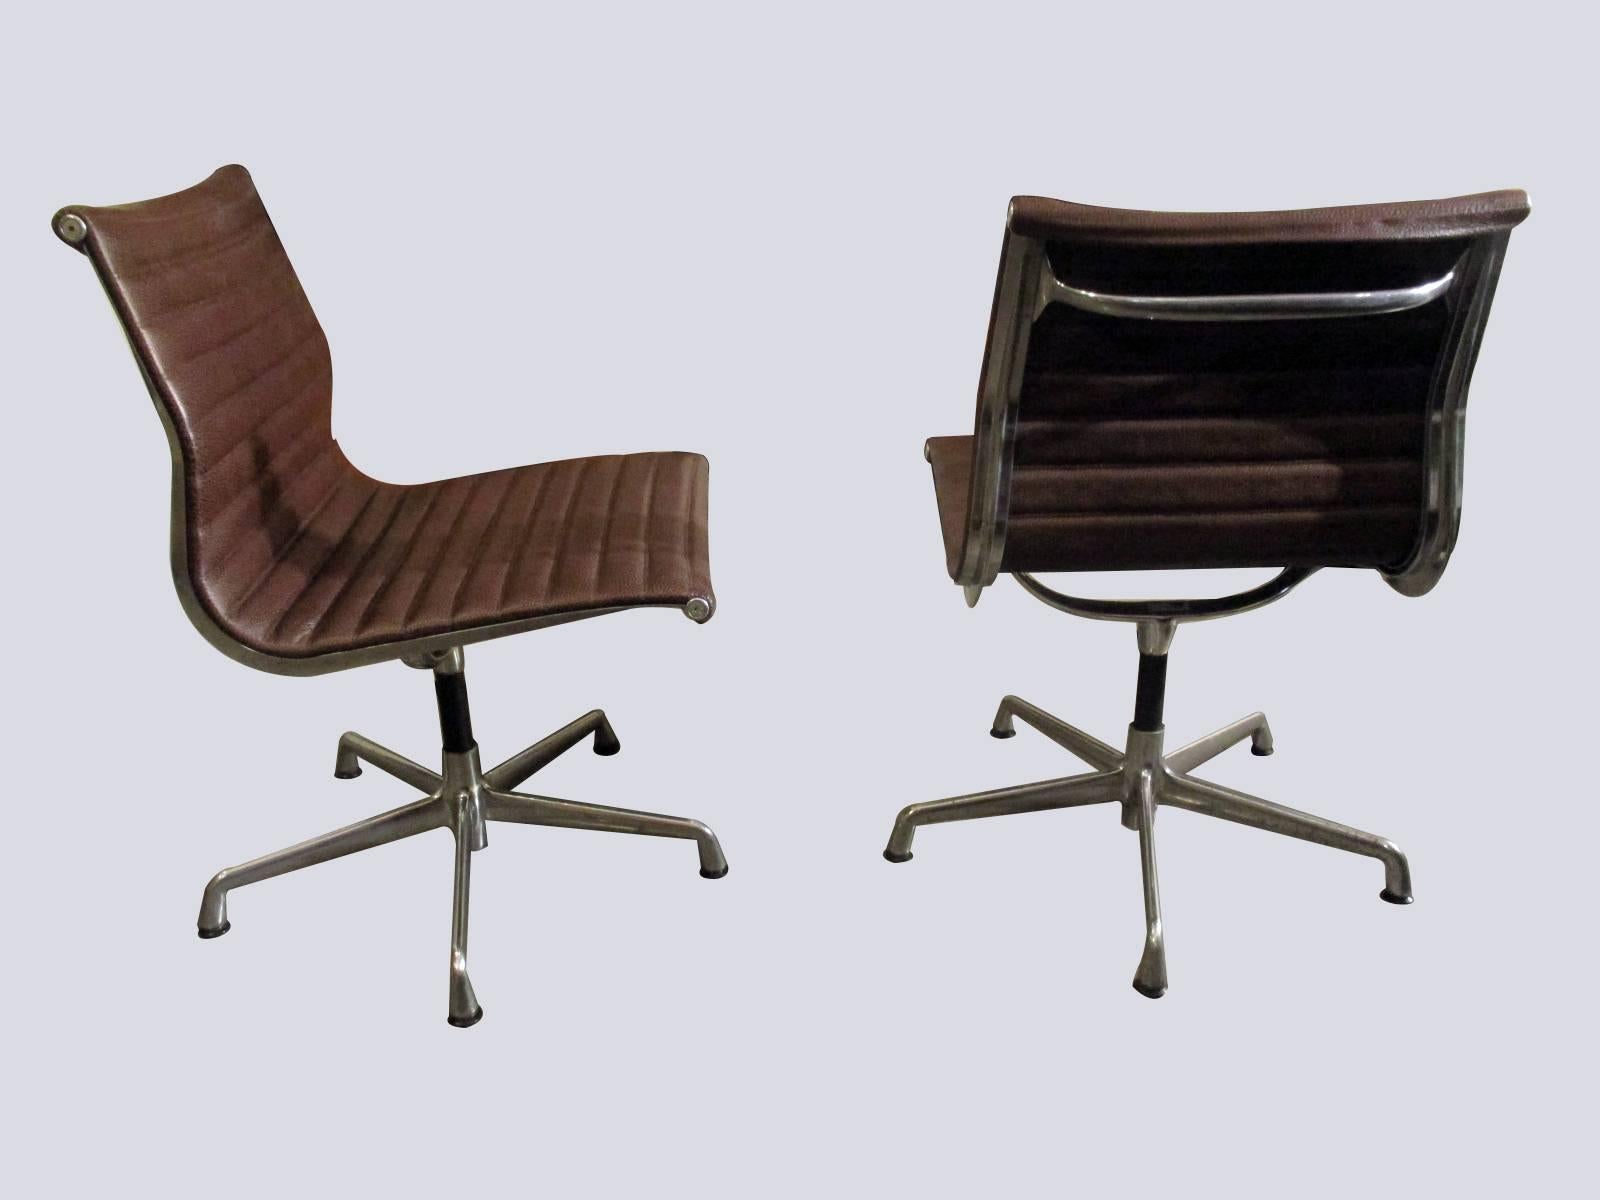 Mexican Eames Aluminium Group Armless Chairs for Herman Miller Refurbished with Leather For Sale